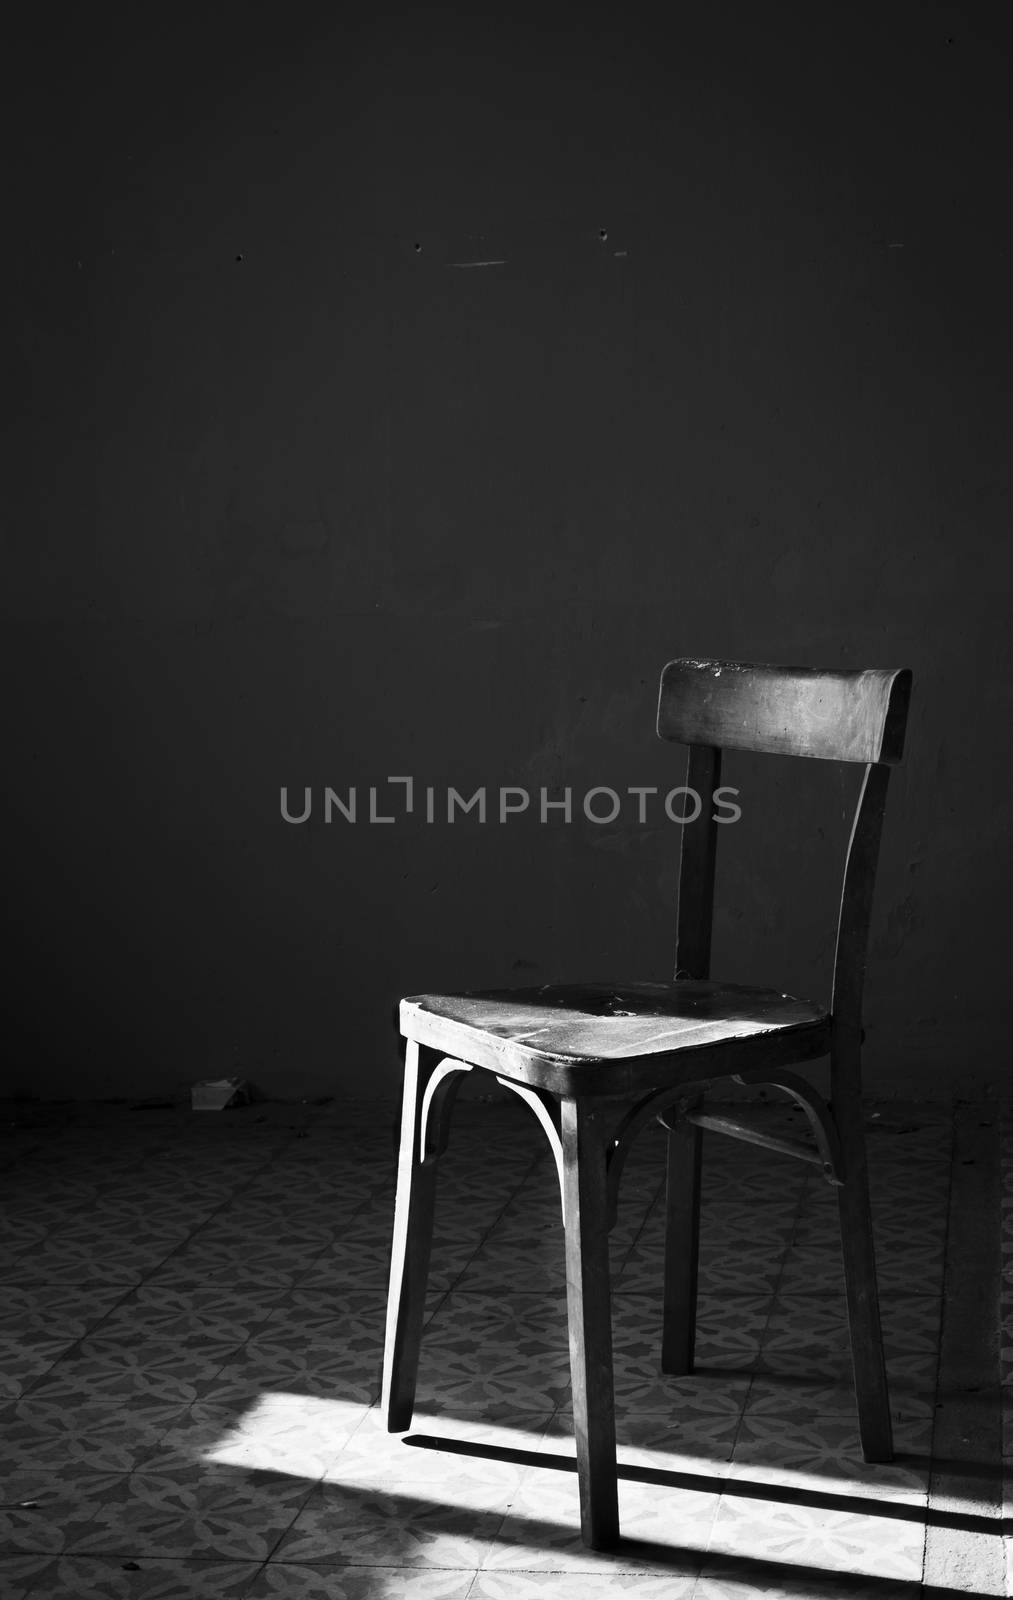 Vintage abandoned chair in black & white